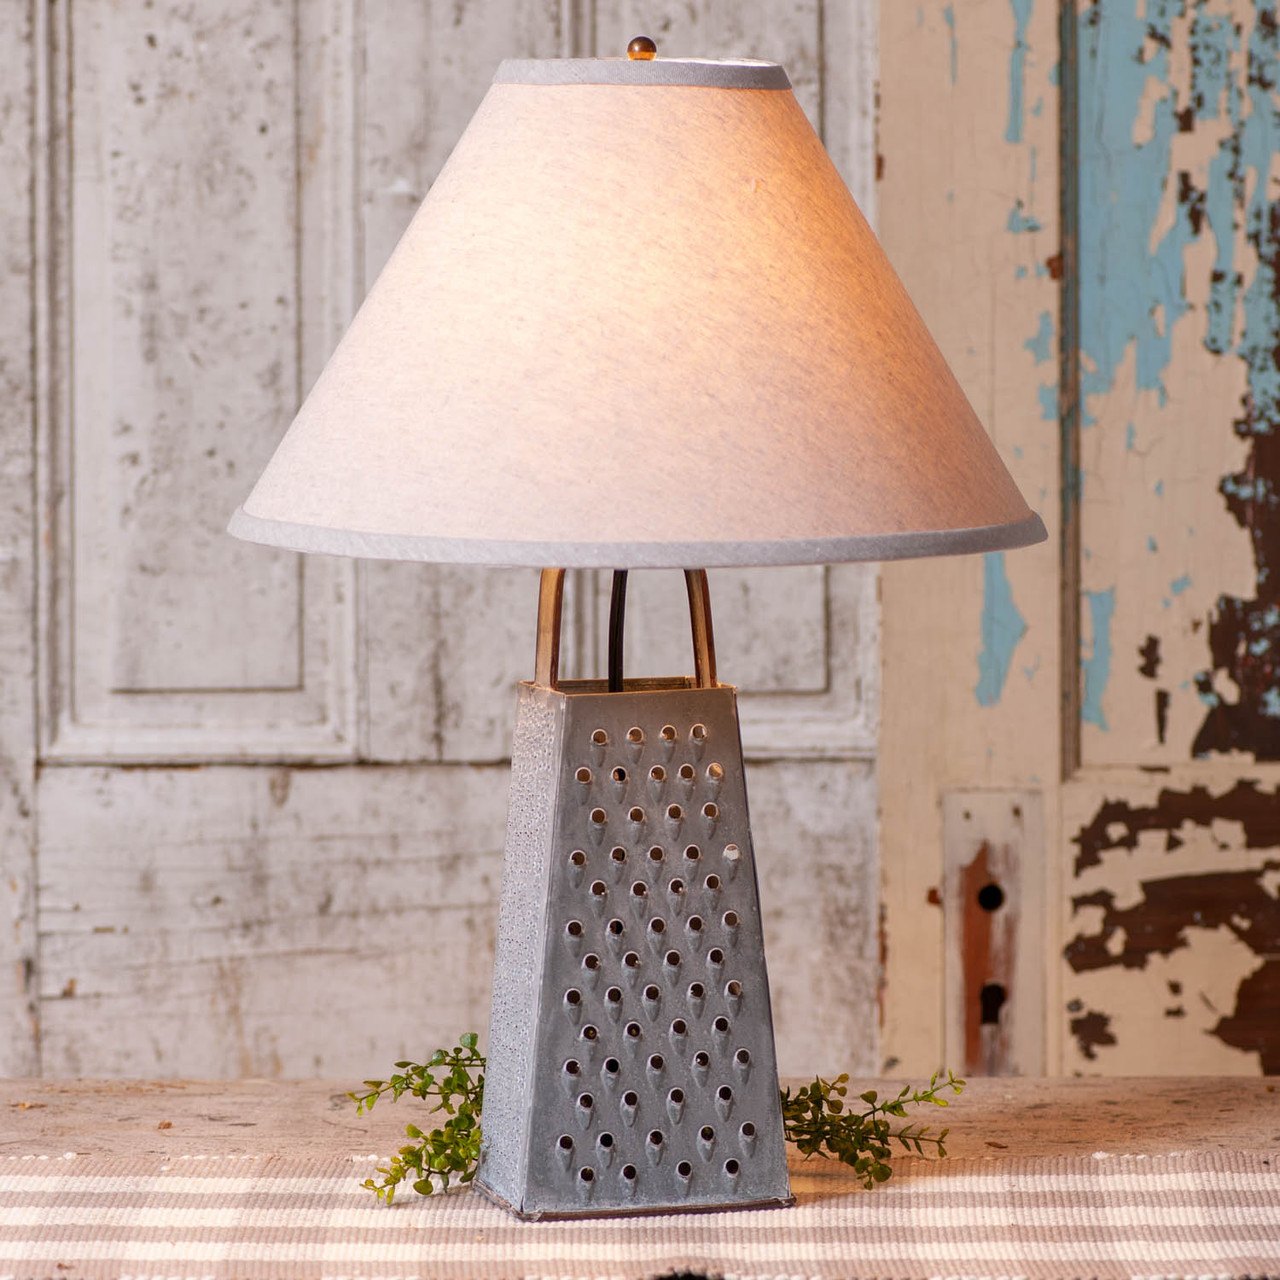 https://cdn11.bigcommerce.com/s-dwlxj/images/stencil/1280x1280/products/4415/9296/K19-46A-irvins-tinware-grater-lamp-with-ivory-linen-shade__83768.1608771136.jpg?c=2